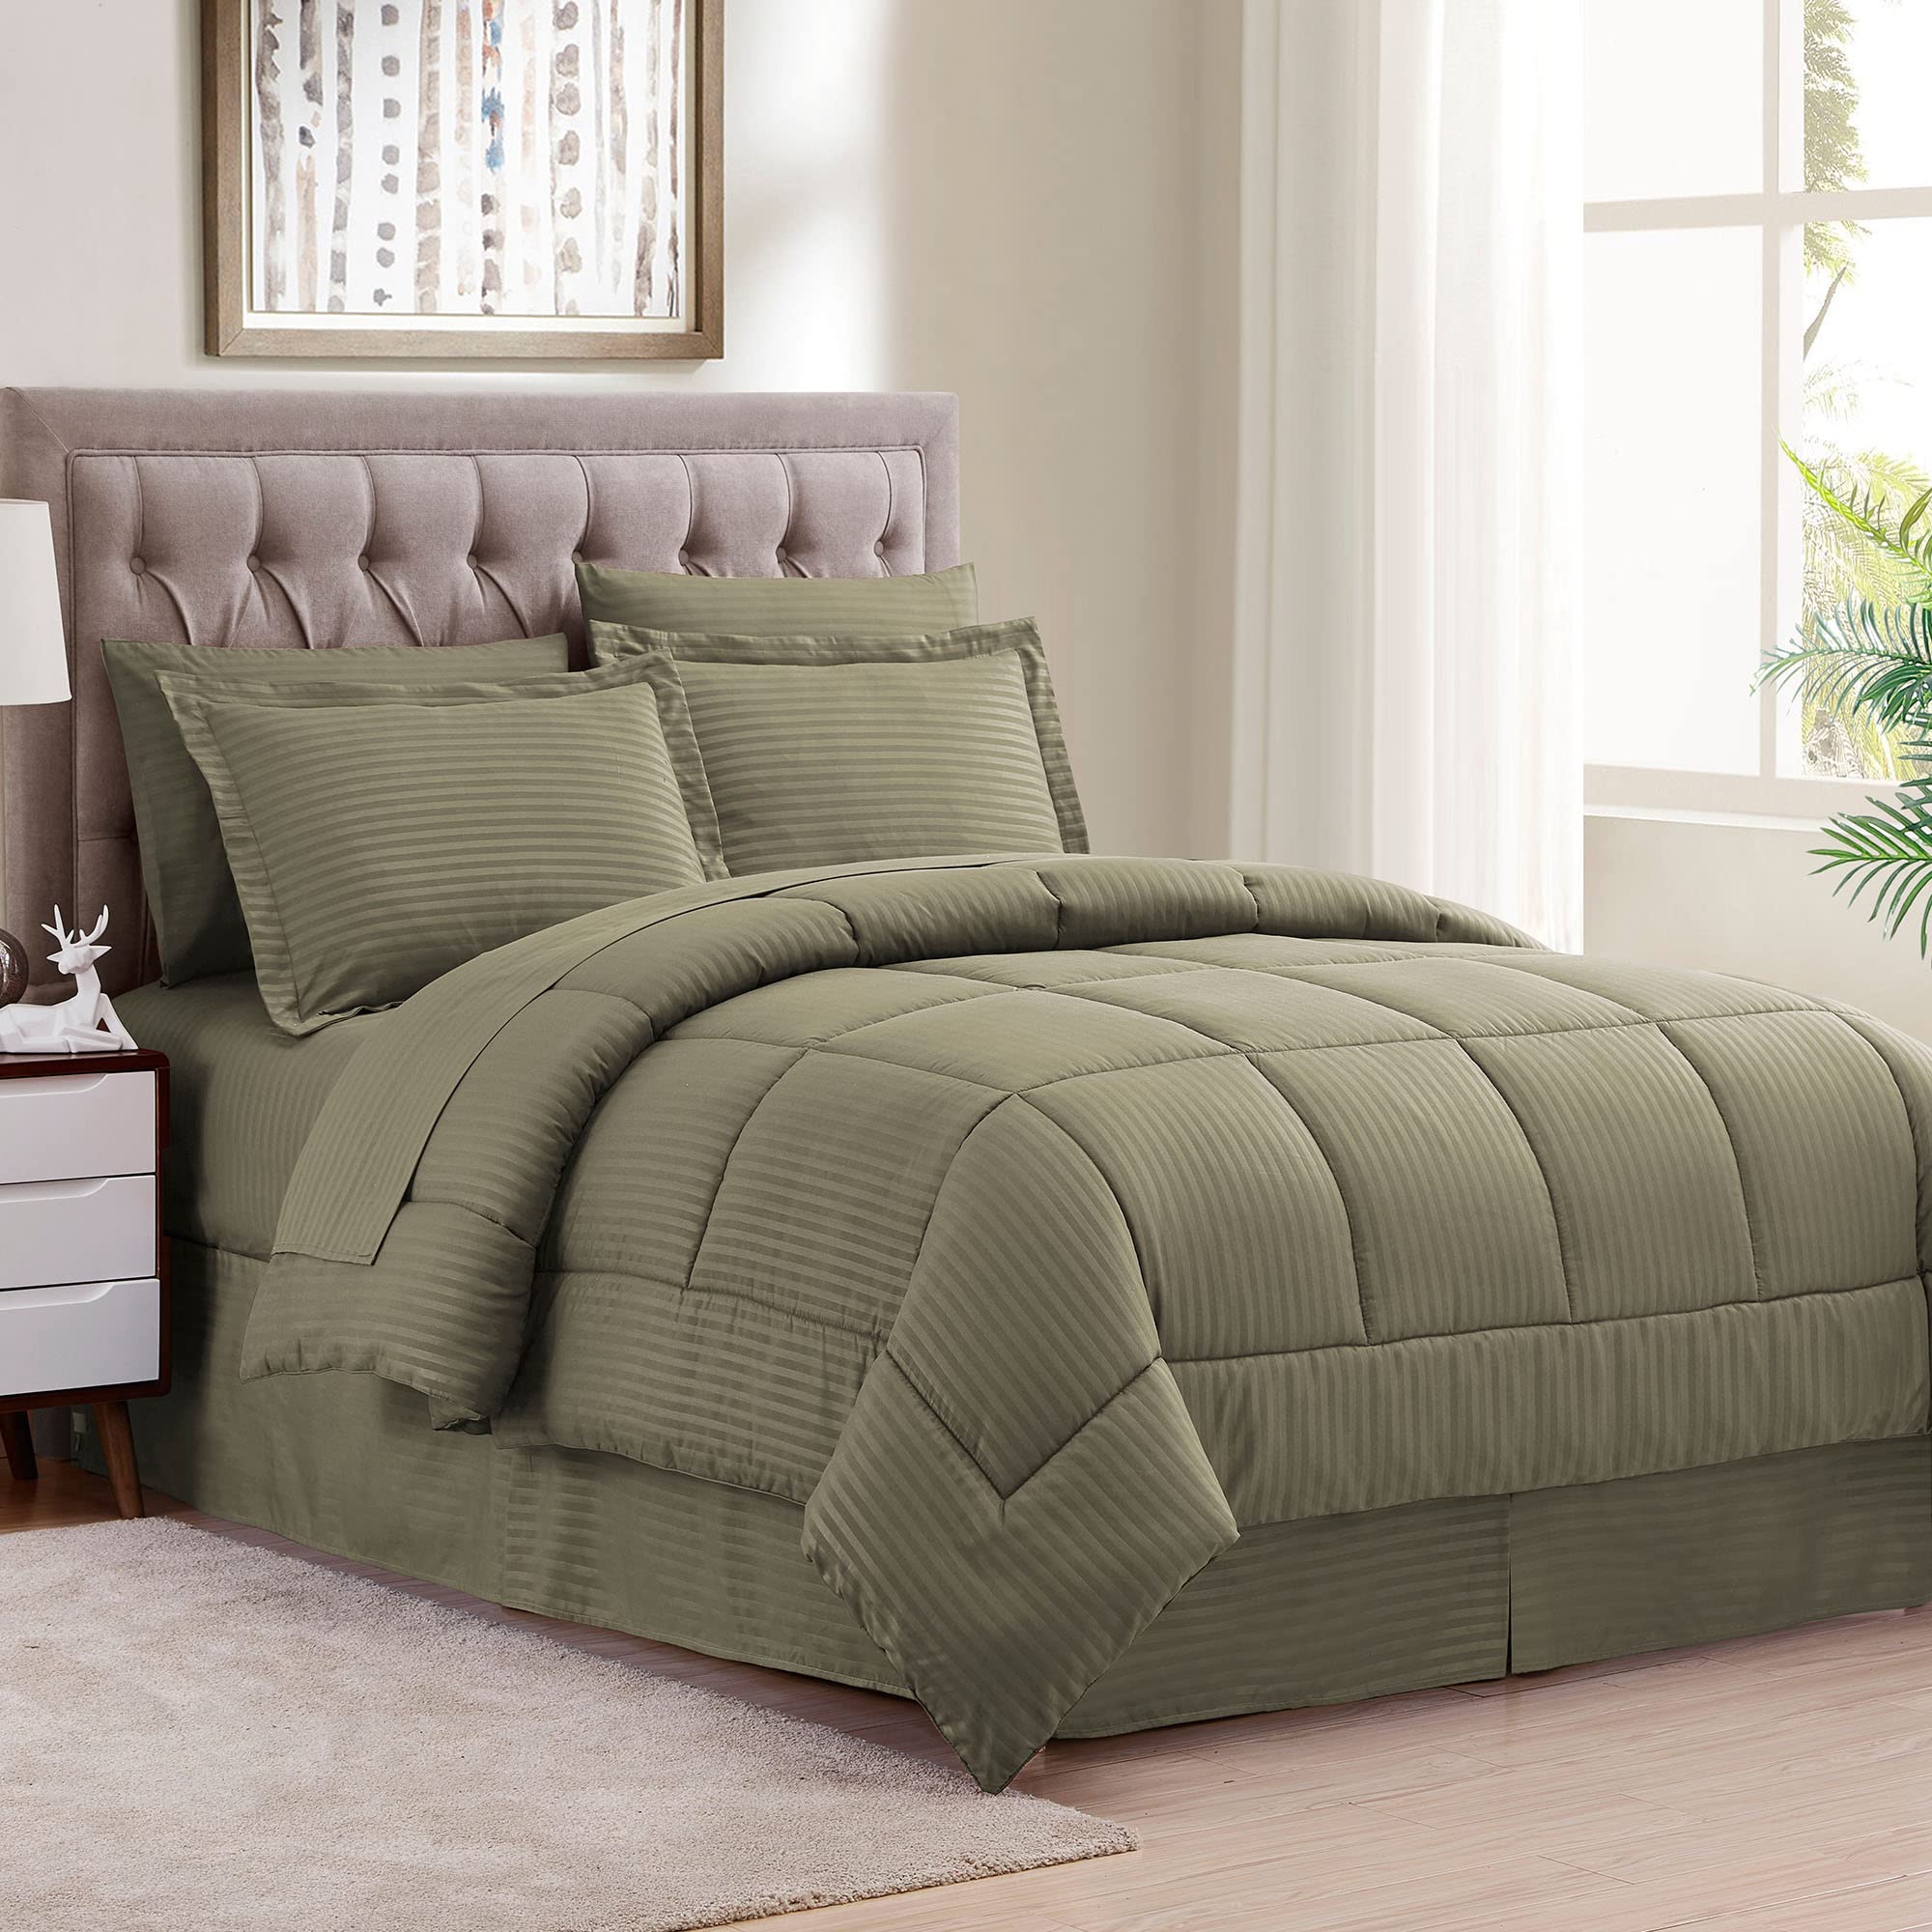 Book Cover Sweet Home Collection 8 Piece Bed In A Bag with Dobby Stripe Comforter, Sheet Set, Bed Skirt, and Sham Set - Queen - Sage